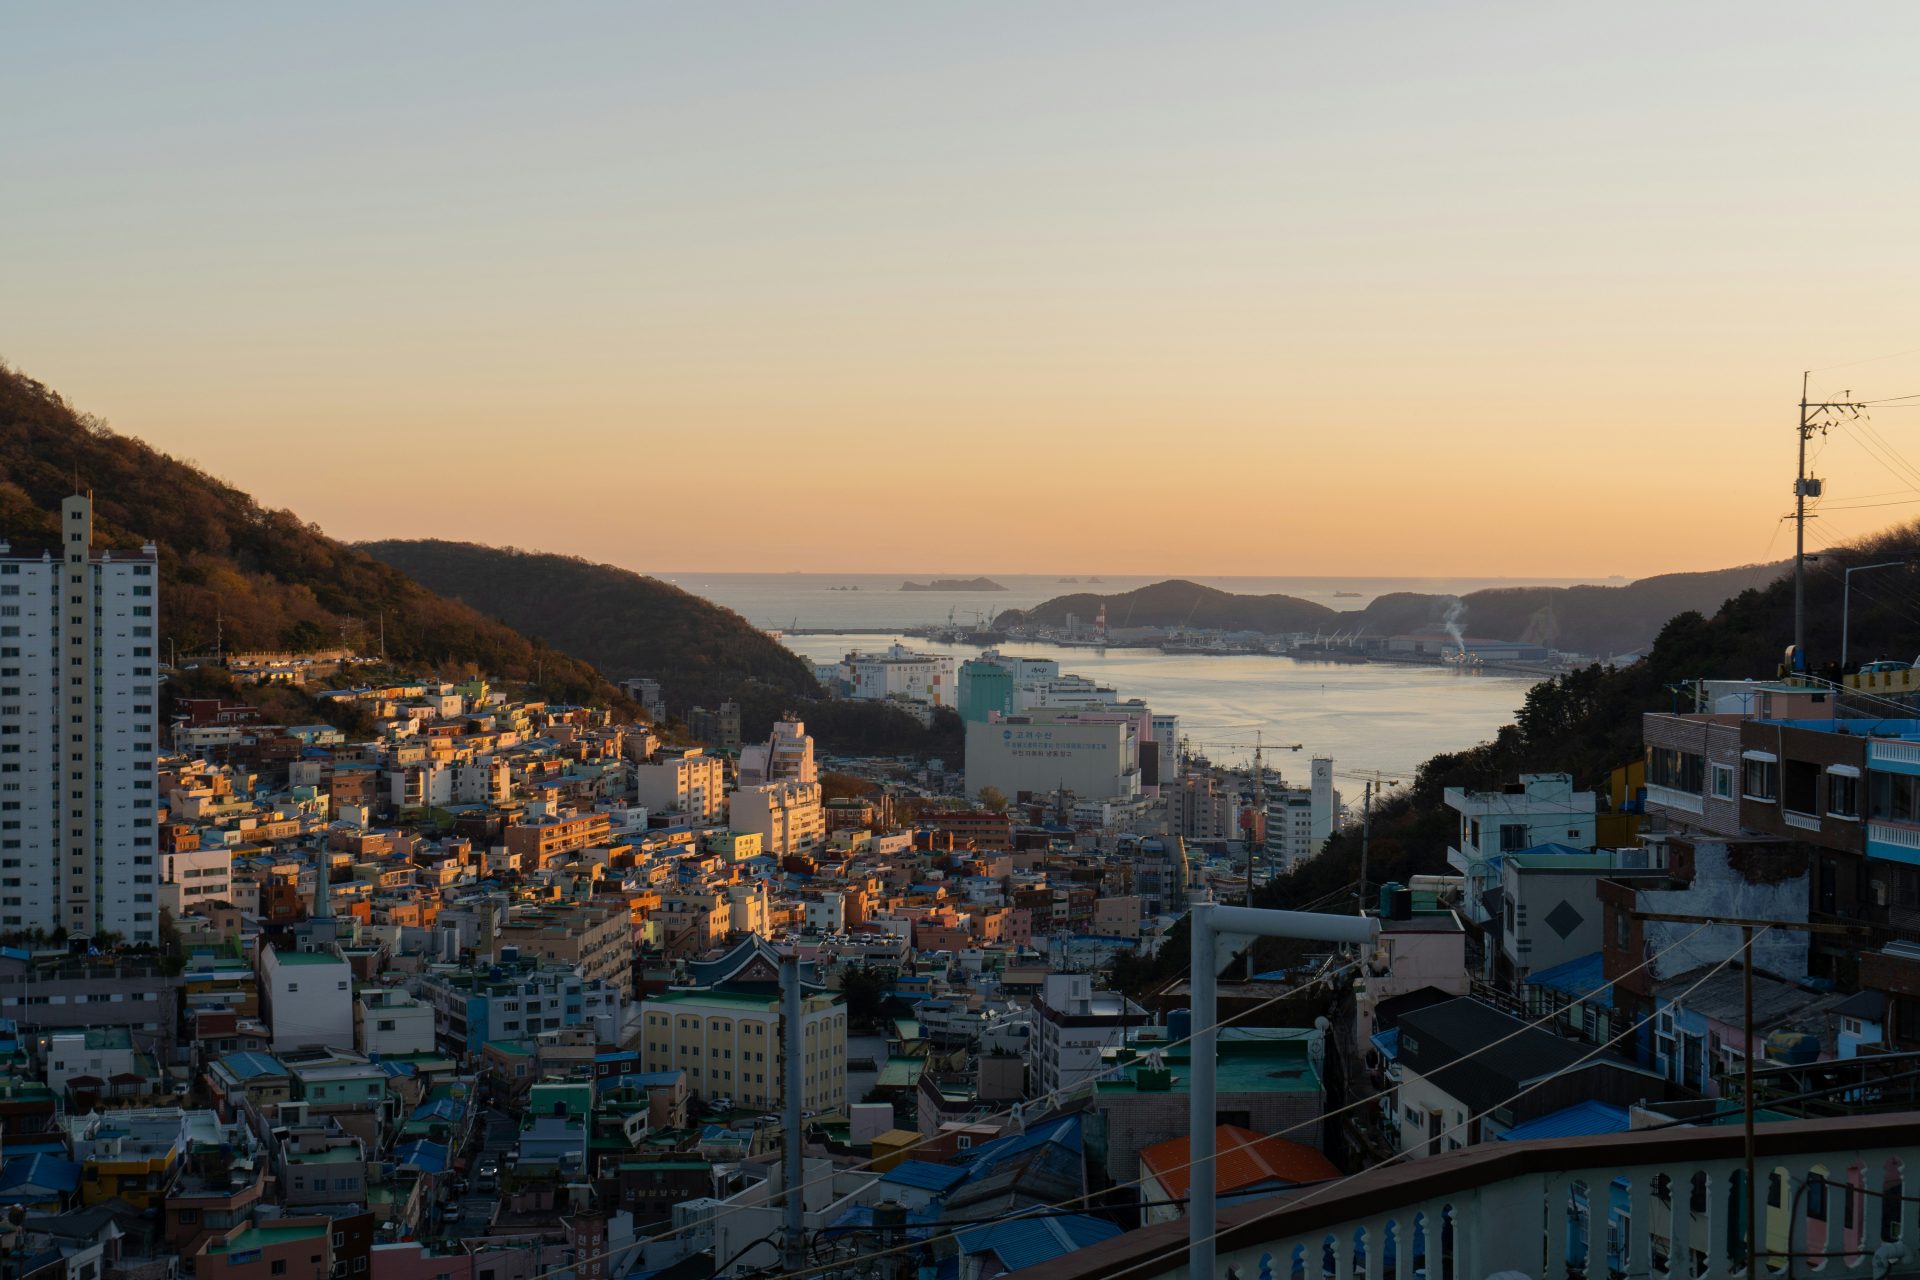 <p>Busan is Korea's largest port city and the second-largest city in the country. There are many sightseeing spots, including Haedong Yonggungsa Temple, built on a rocky area by the sea.</p> <p>Image: Patrick / Unsplash</p>